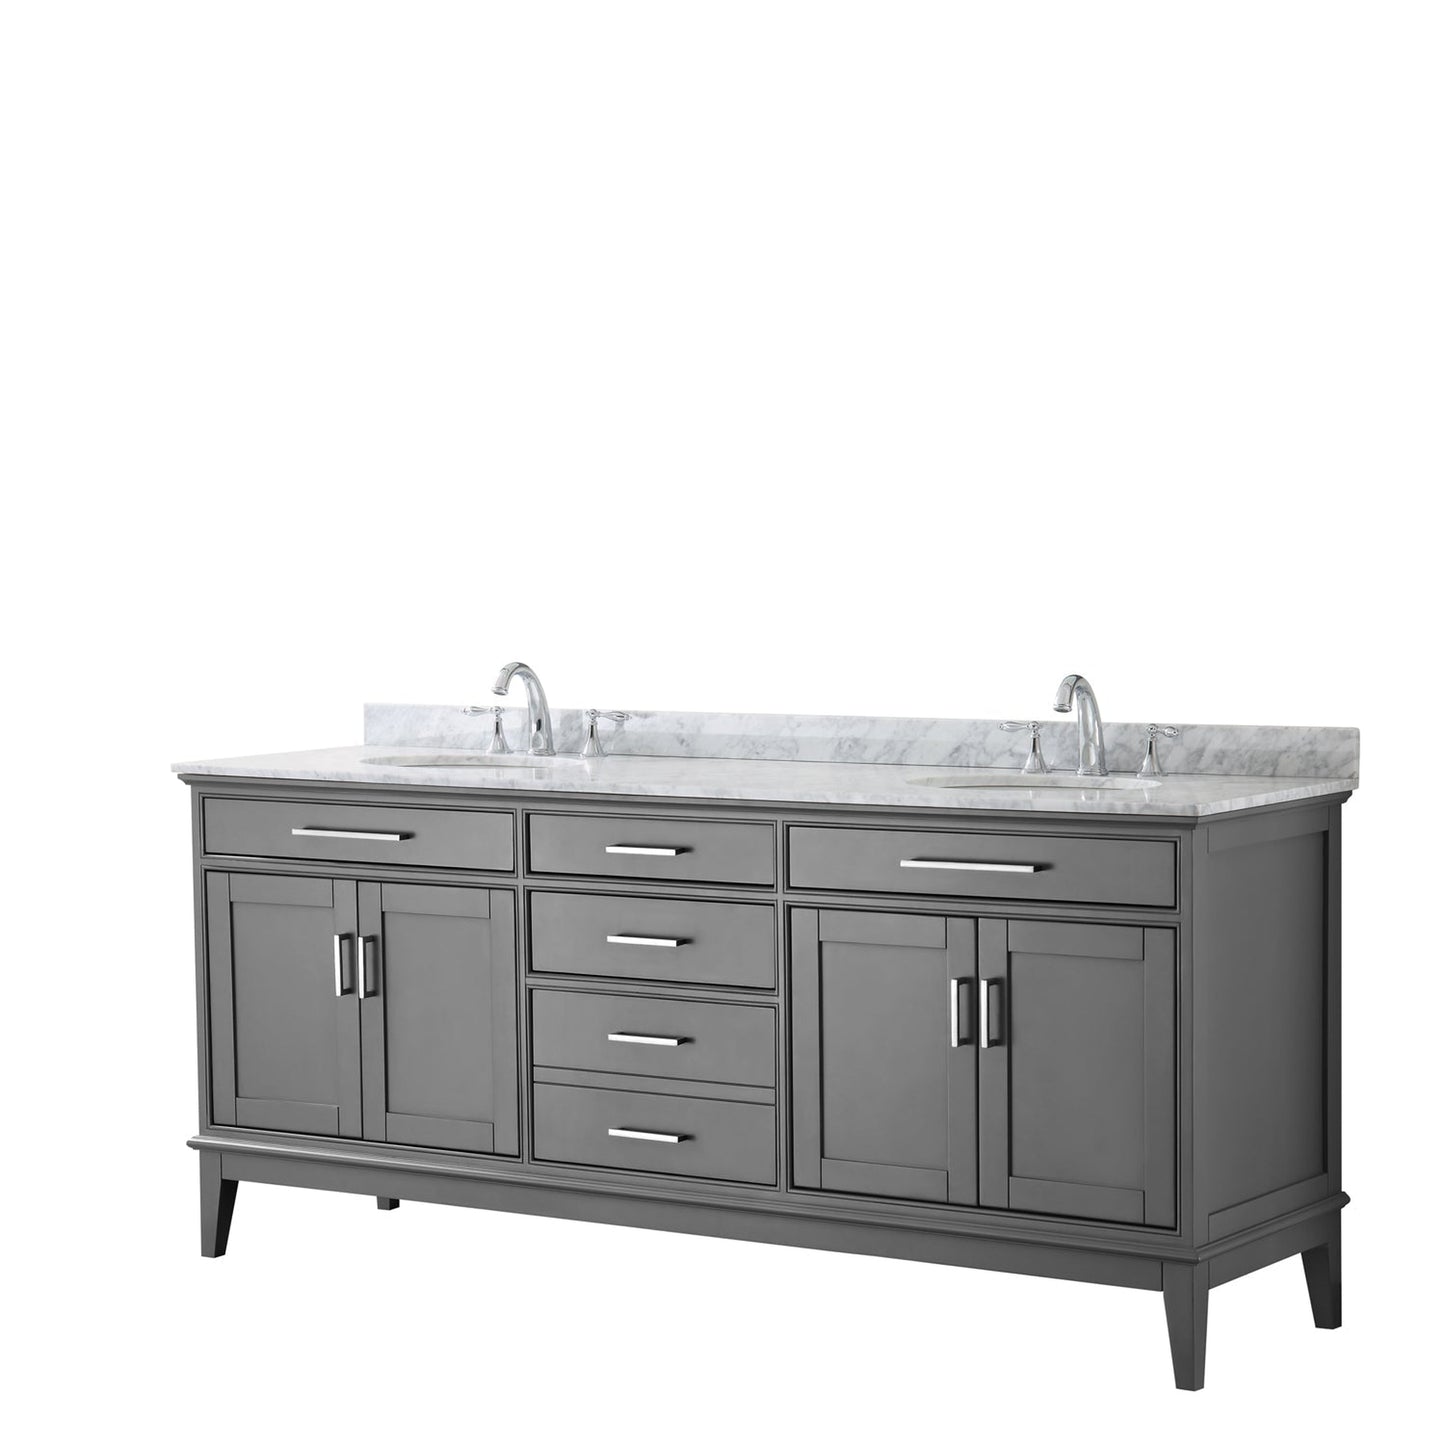 Wyndham Collection Margate 80" Double Bathroom Dark Gray Vanity With White Carrara Marble Countertop And Undermount Oval Sink